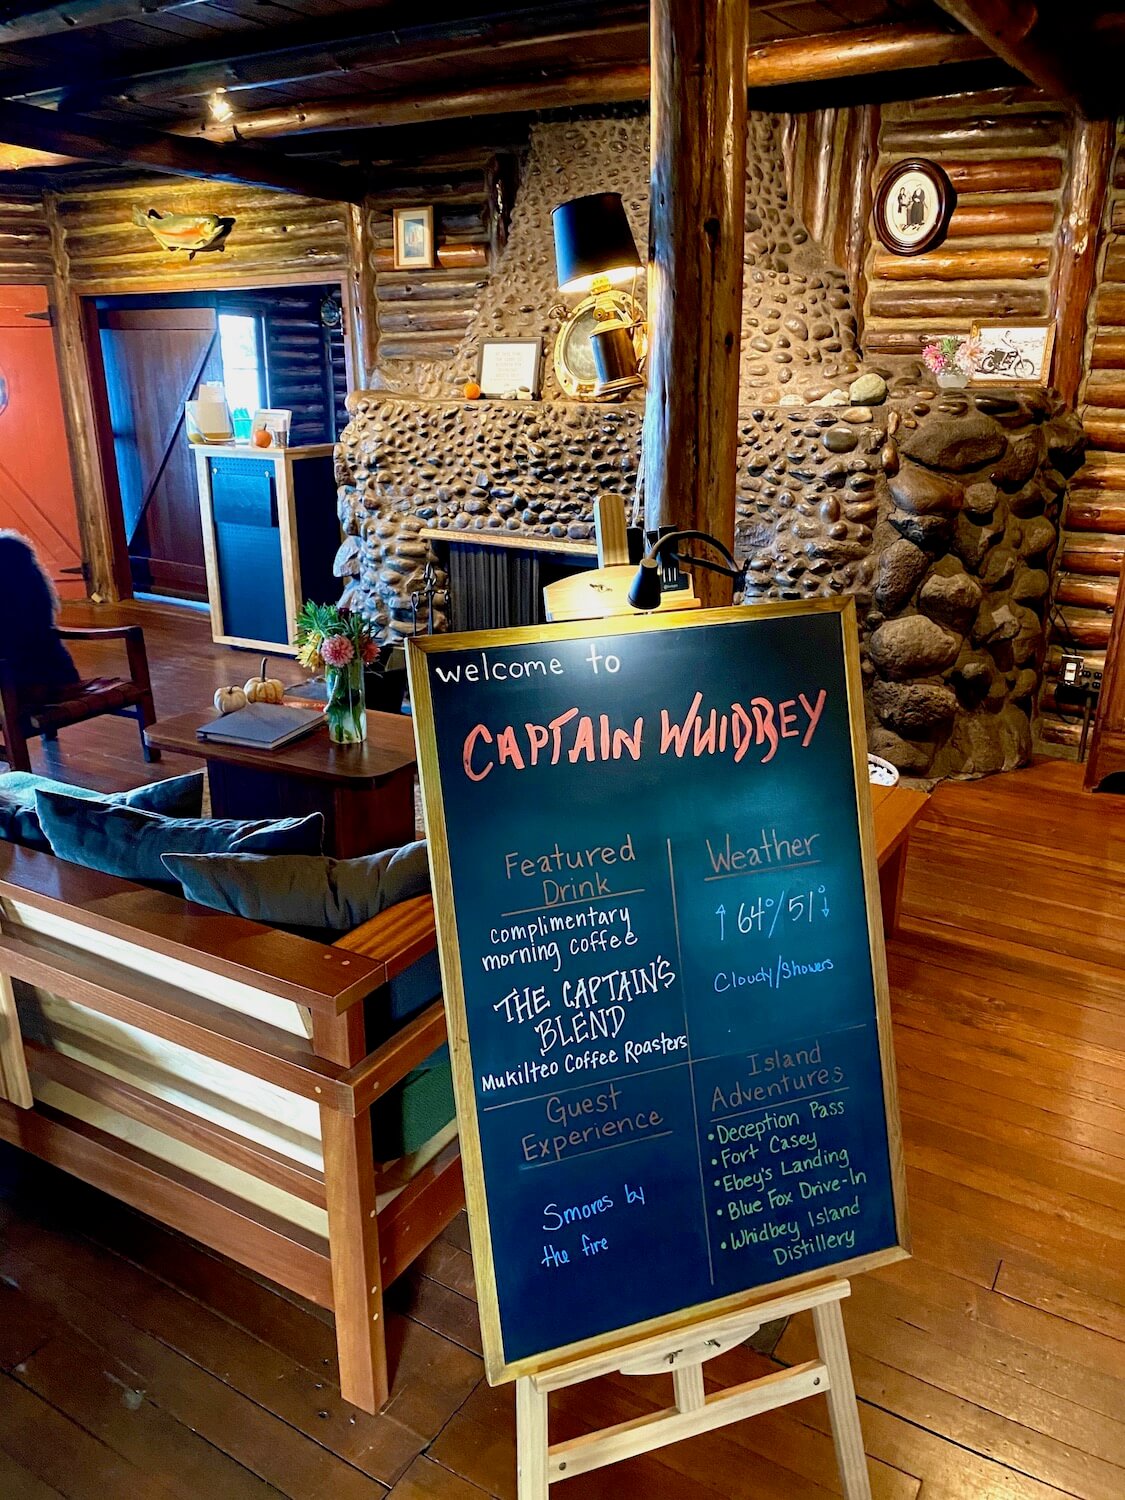 A chalkboard on a wood easel greets visitors to the Captain Whidbey, an inn that sits steps away from Penn Cove on Whidbey Island. The chalk board displays a variety of helpful information. Behind the easel the mixture of wood textures adds a cozy atmosphere against the gray stones that compose the large fireplace.